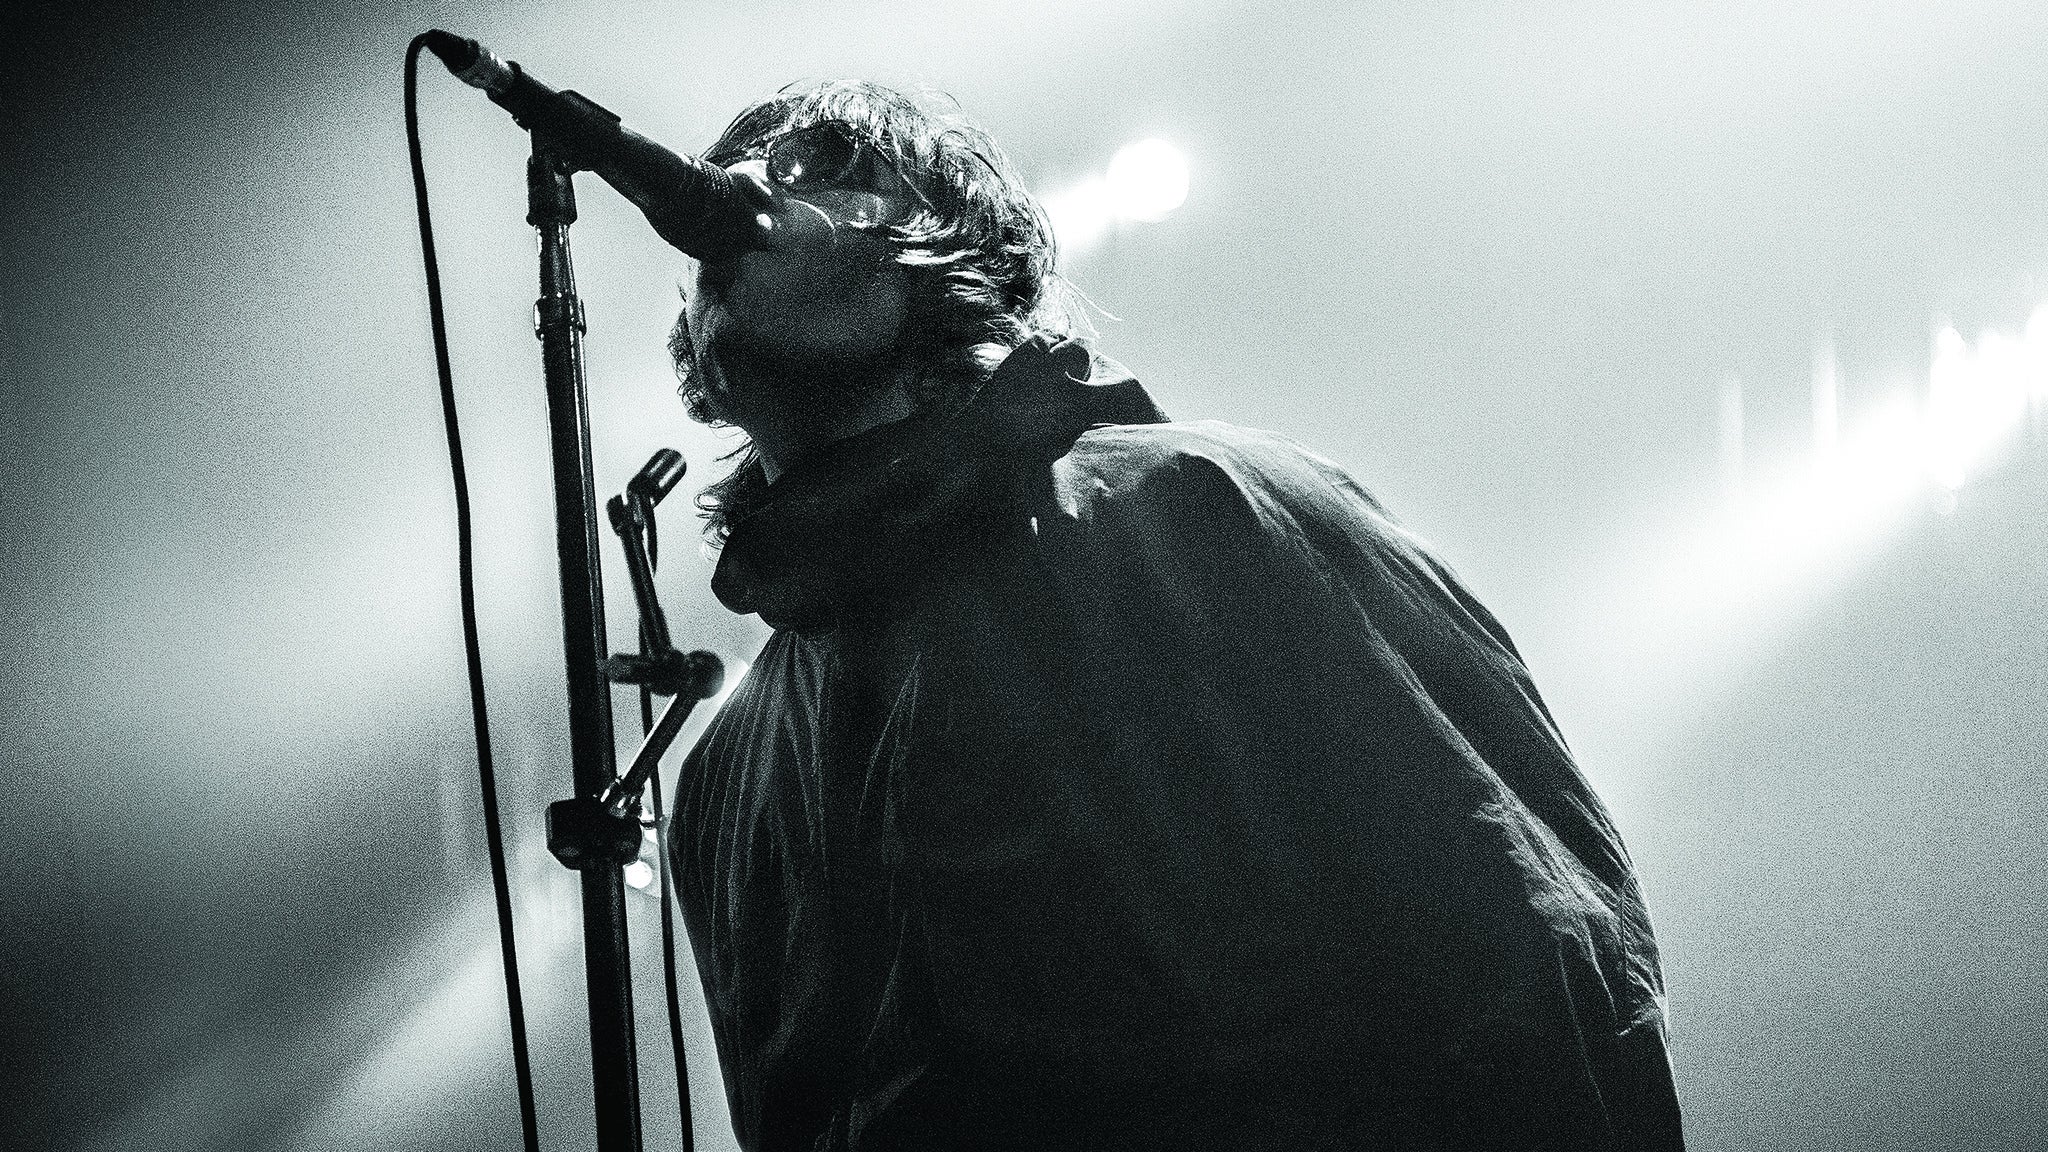 Liam Gallagher in Los Angeles promo photo for Live Nation presale offer code